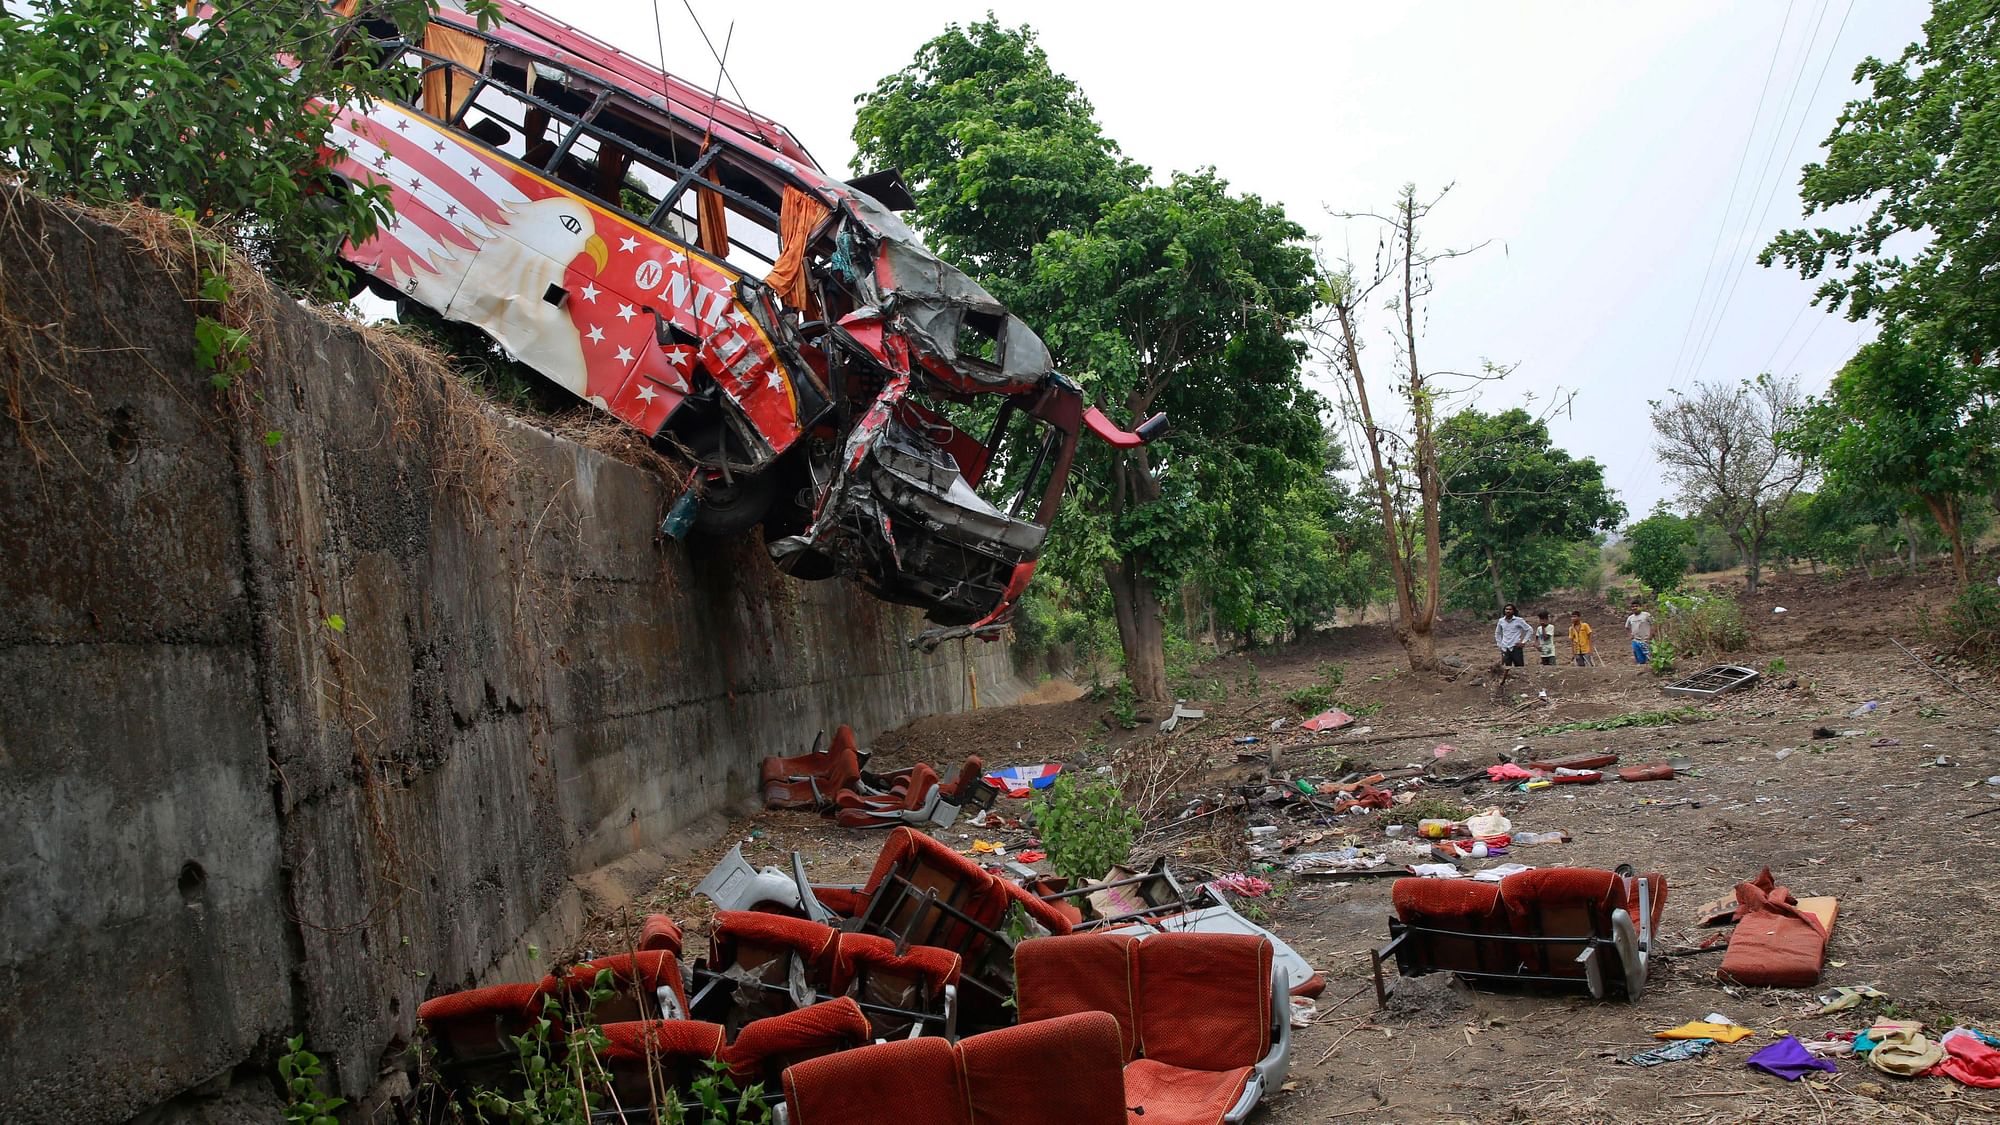 A bus pulled out of a ditch in Mumbai. Image used for representation. (Photo: AP)